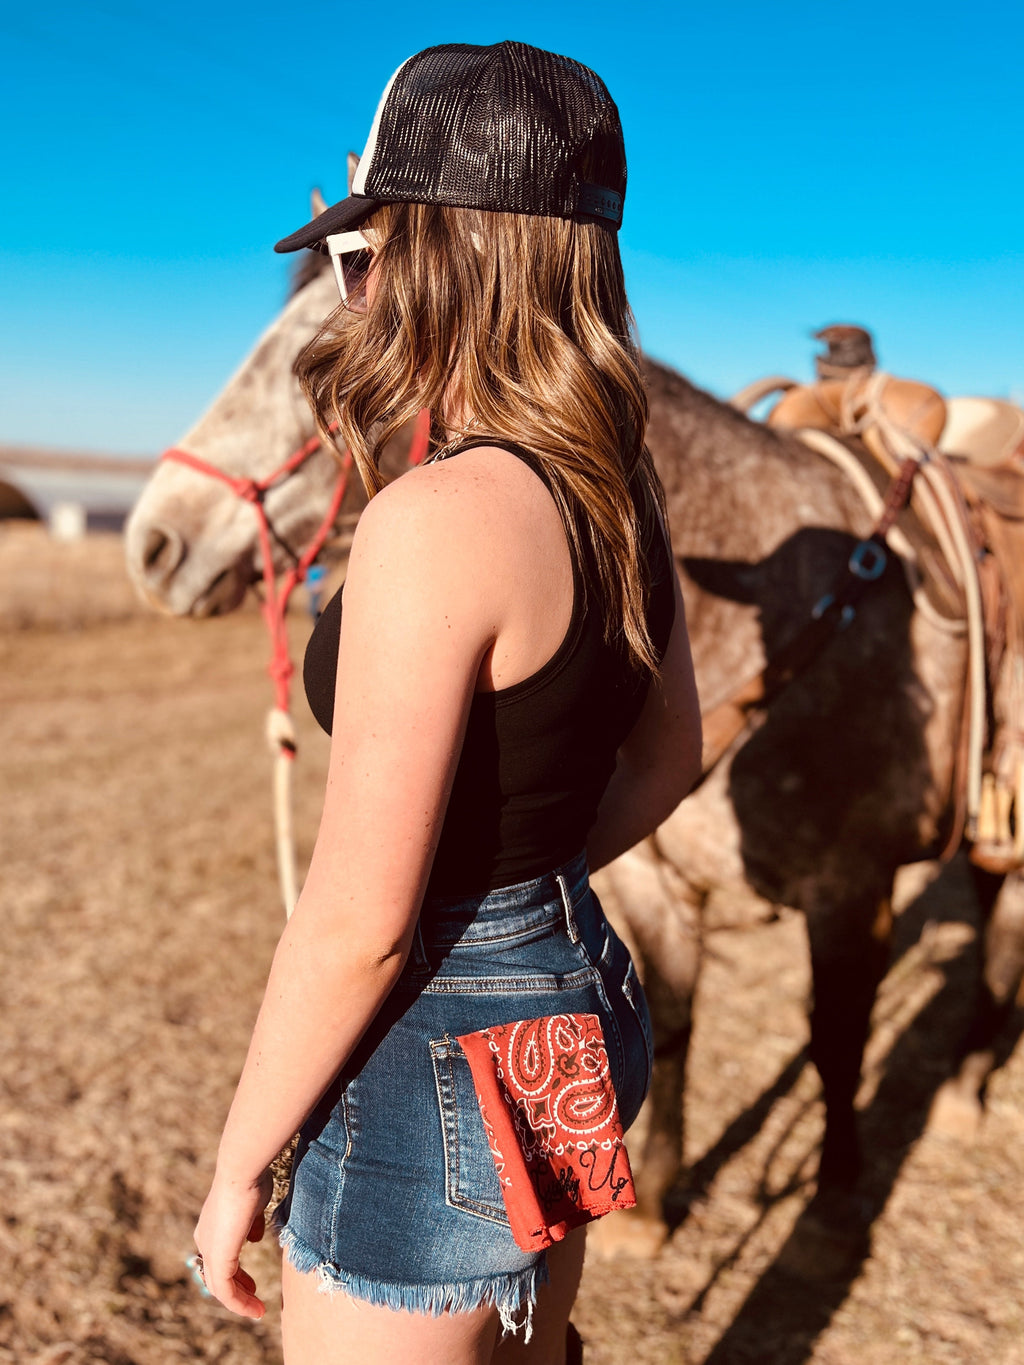 black and white. paisley print. bandana. embroidered. western. womens western boutique. small business. get gussied up. woman owned business. Giddy up.